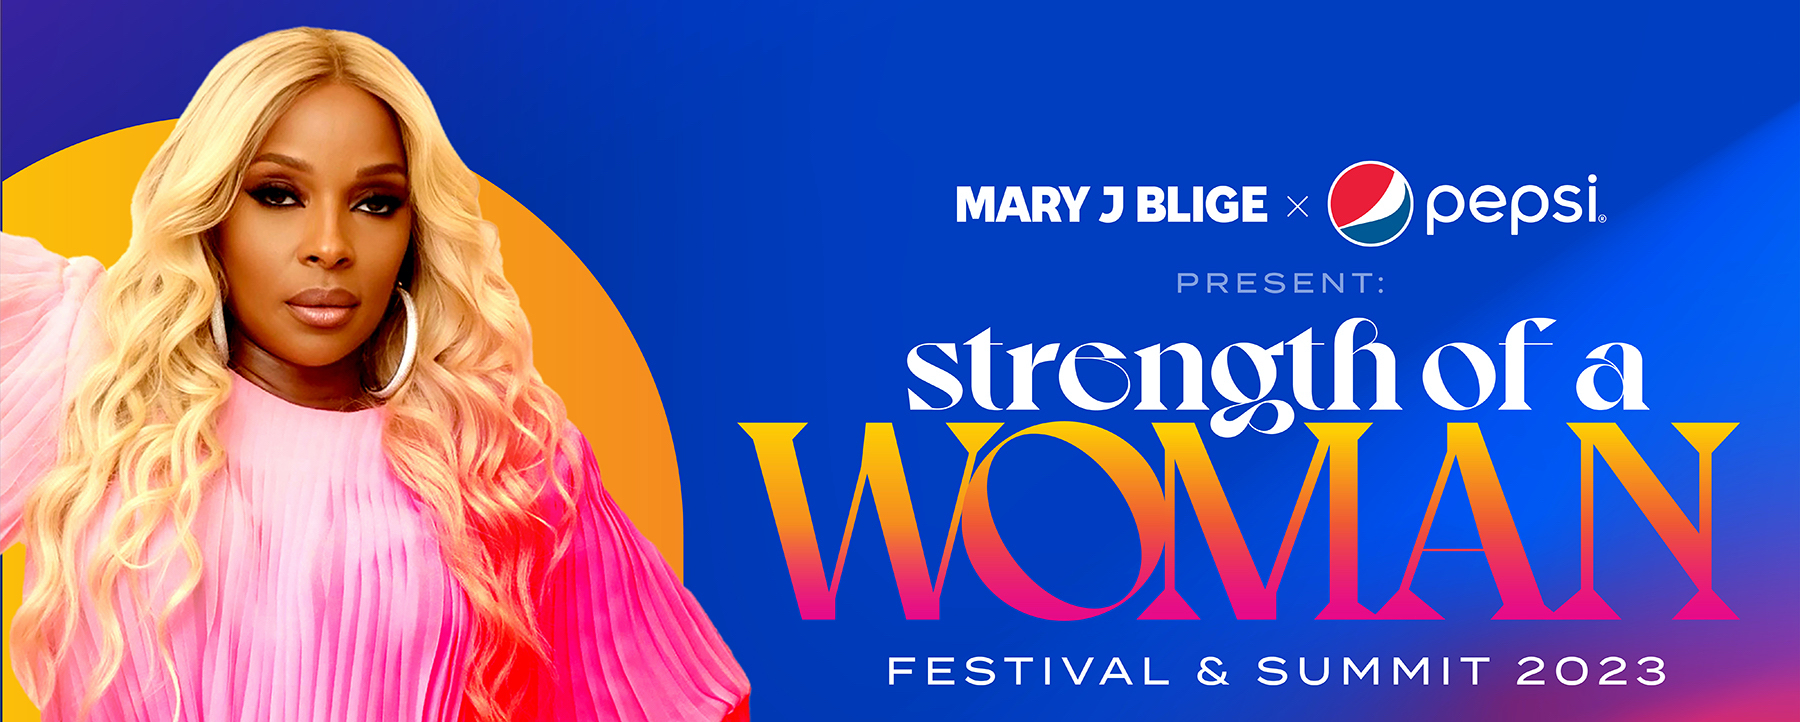 Mary J. Blige Announces Strength of a Woman Festival: Tickets and